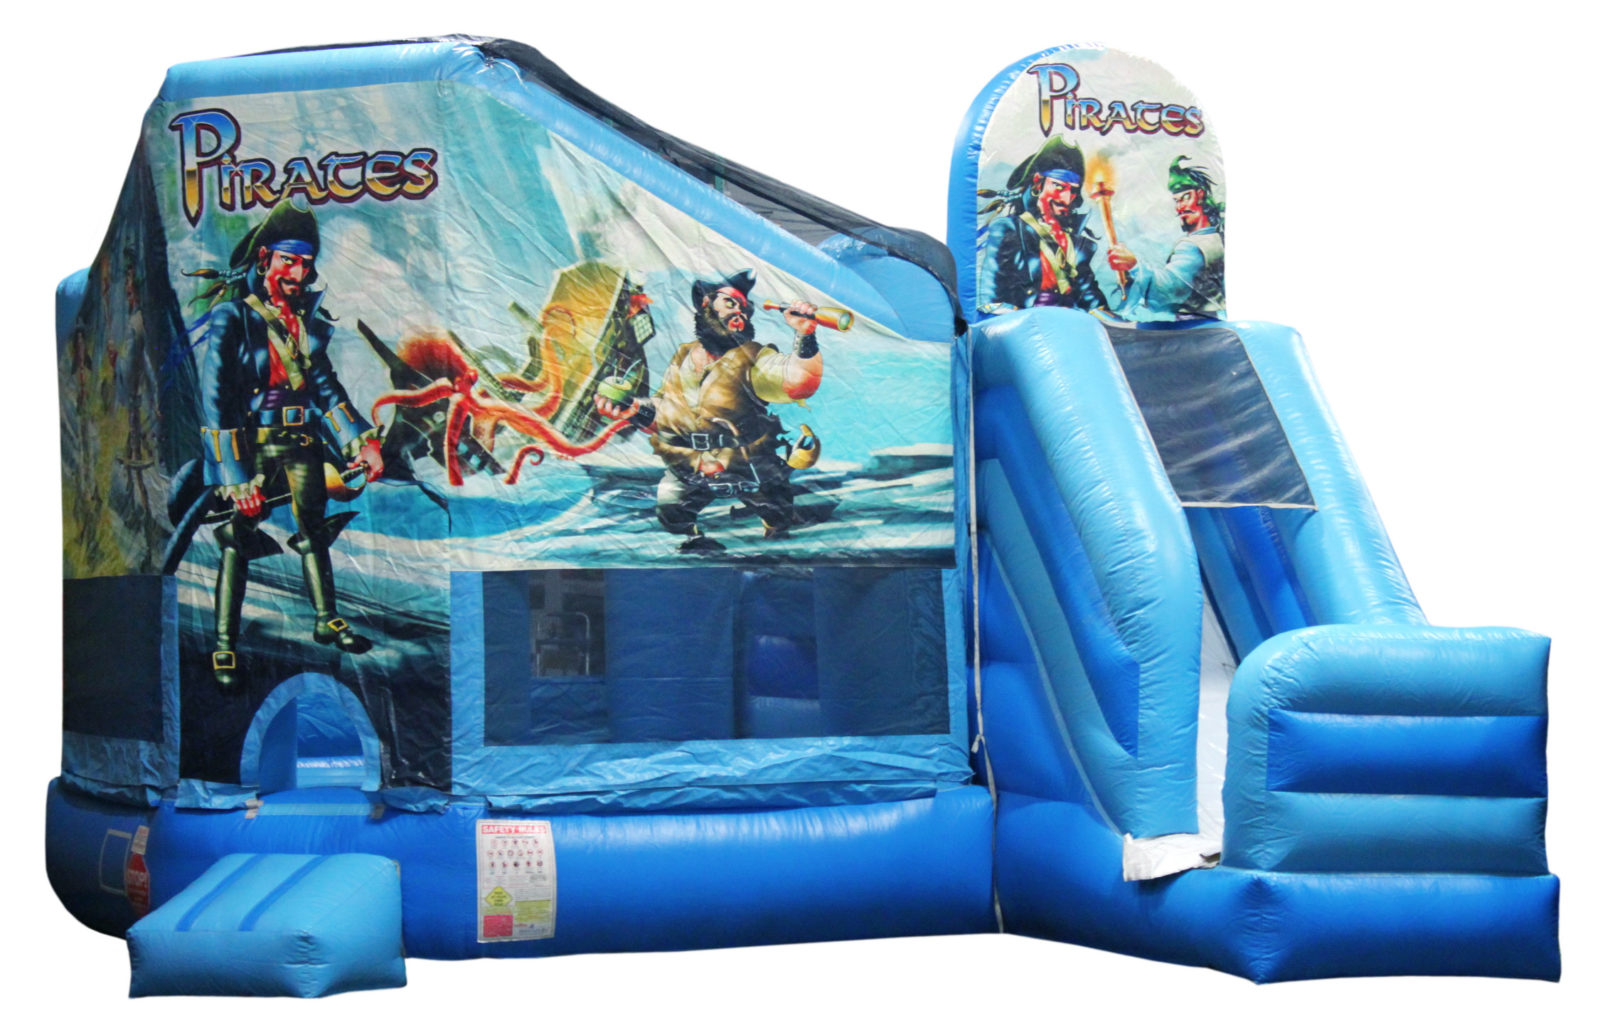 How Much Does It Cost To Have A Bounce House In Virginia Beach? thumbnail